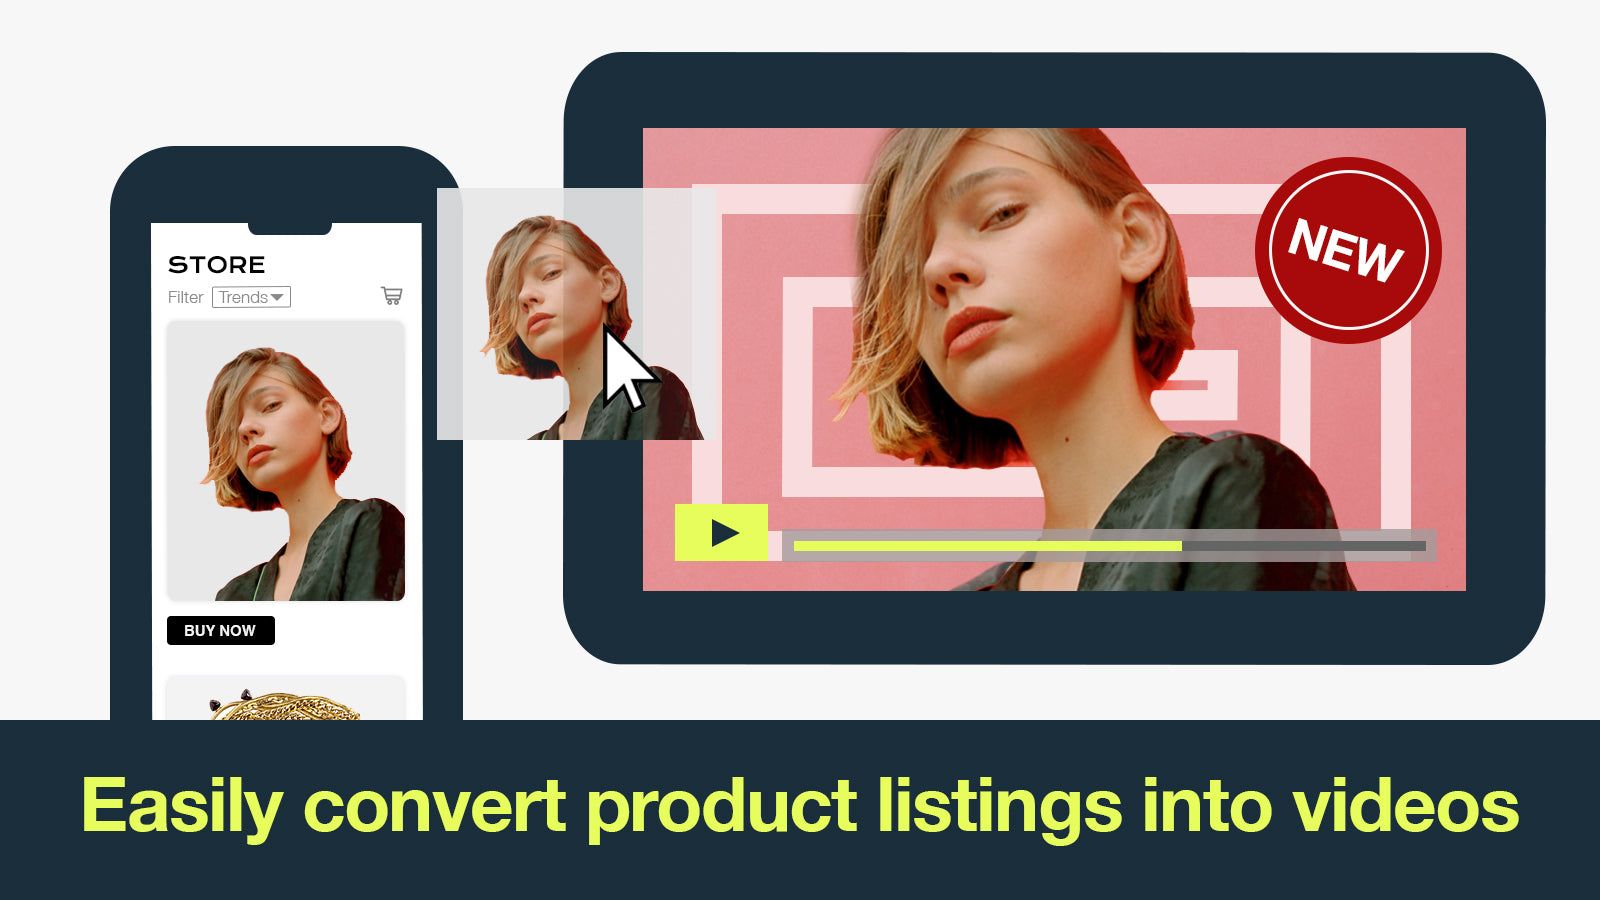 Convert product listings into videos